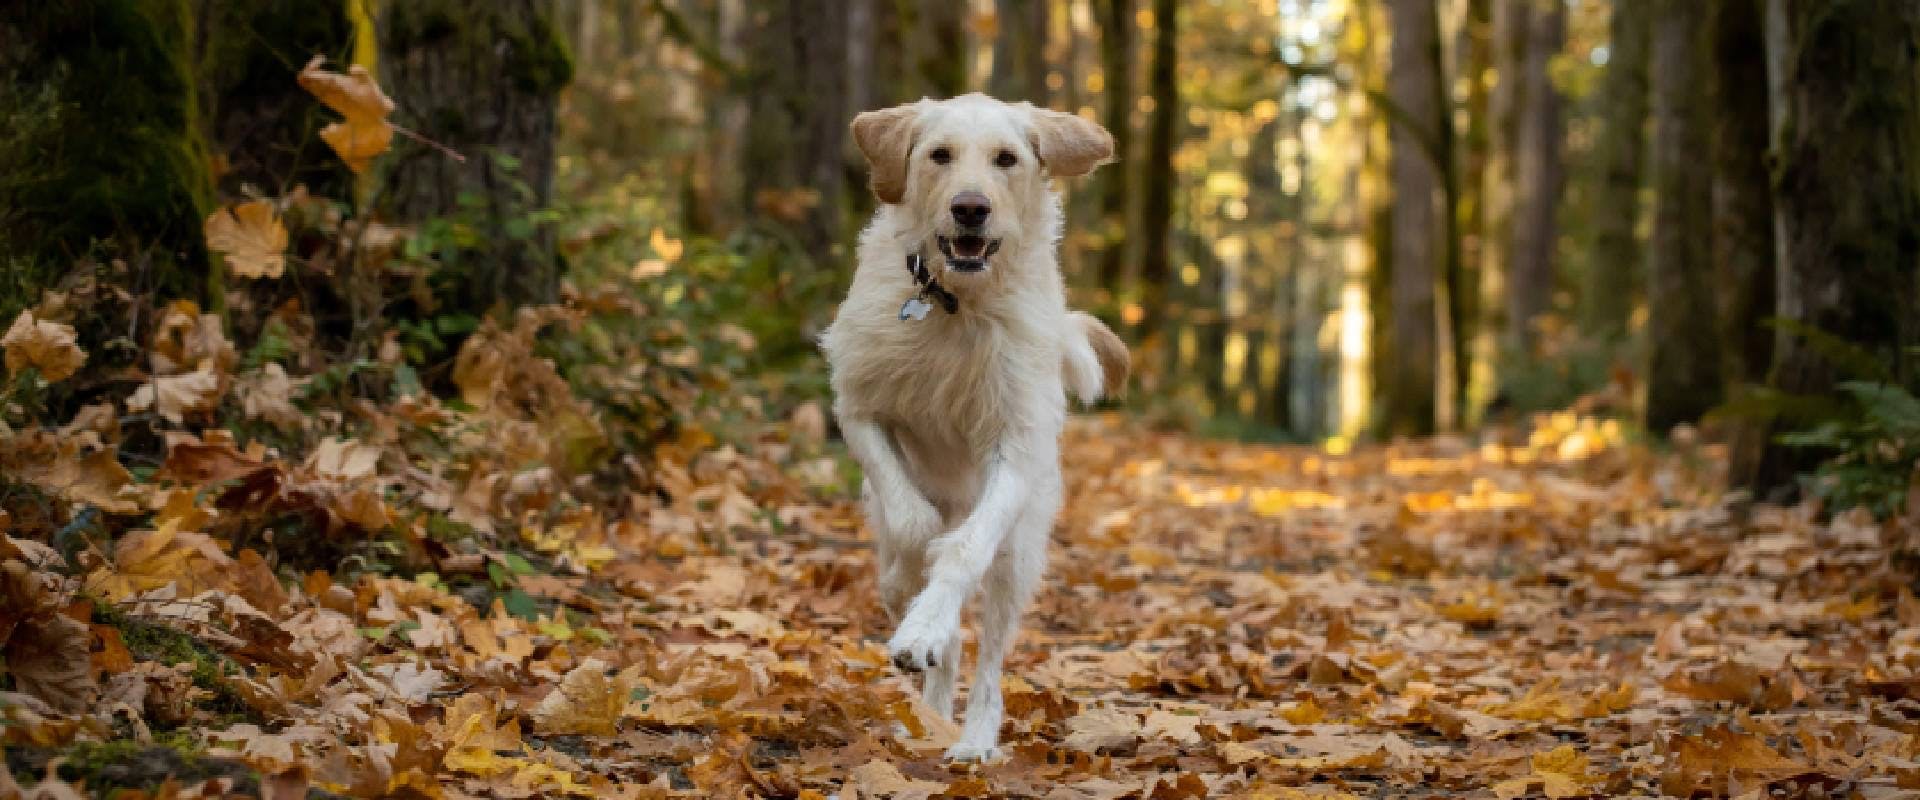 Yellow Labrador dog running in the forest